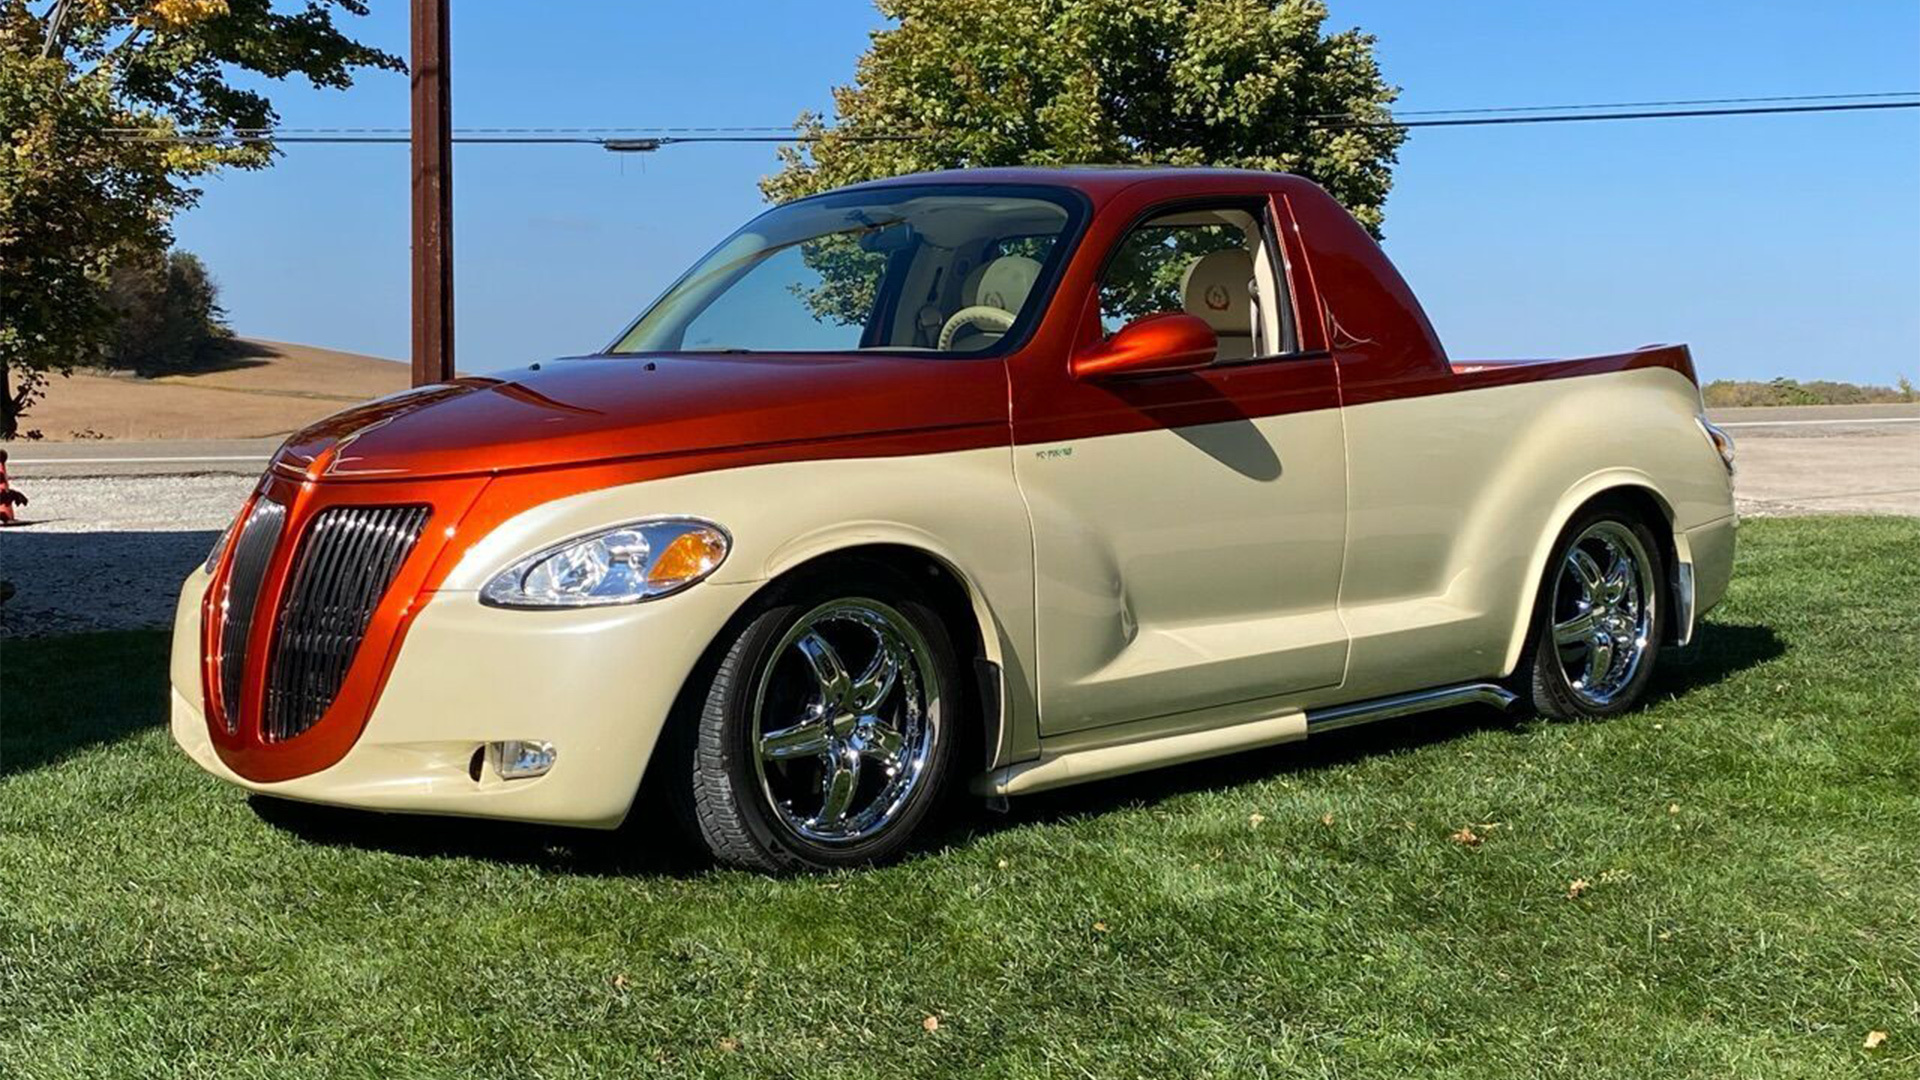 For $44,500, Would You Pickup This Custom Chrysler PT Cruiser? | Carscoops